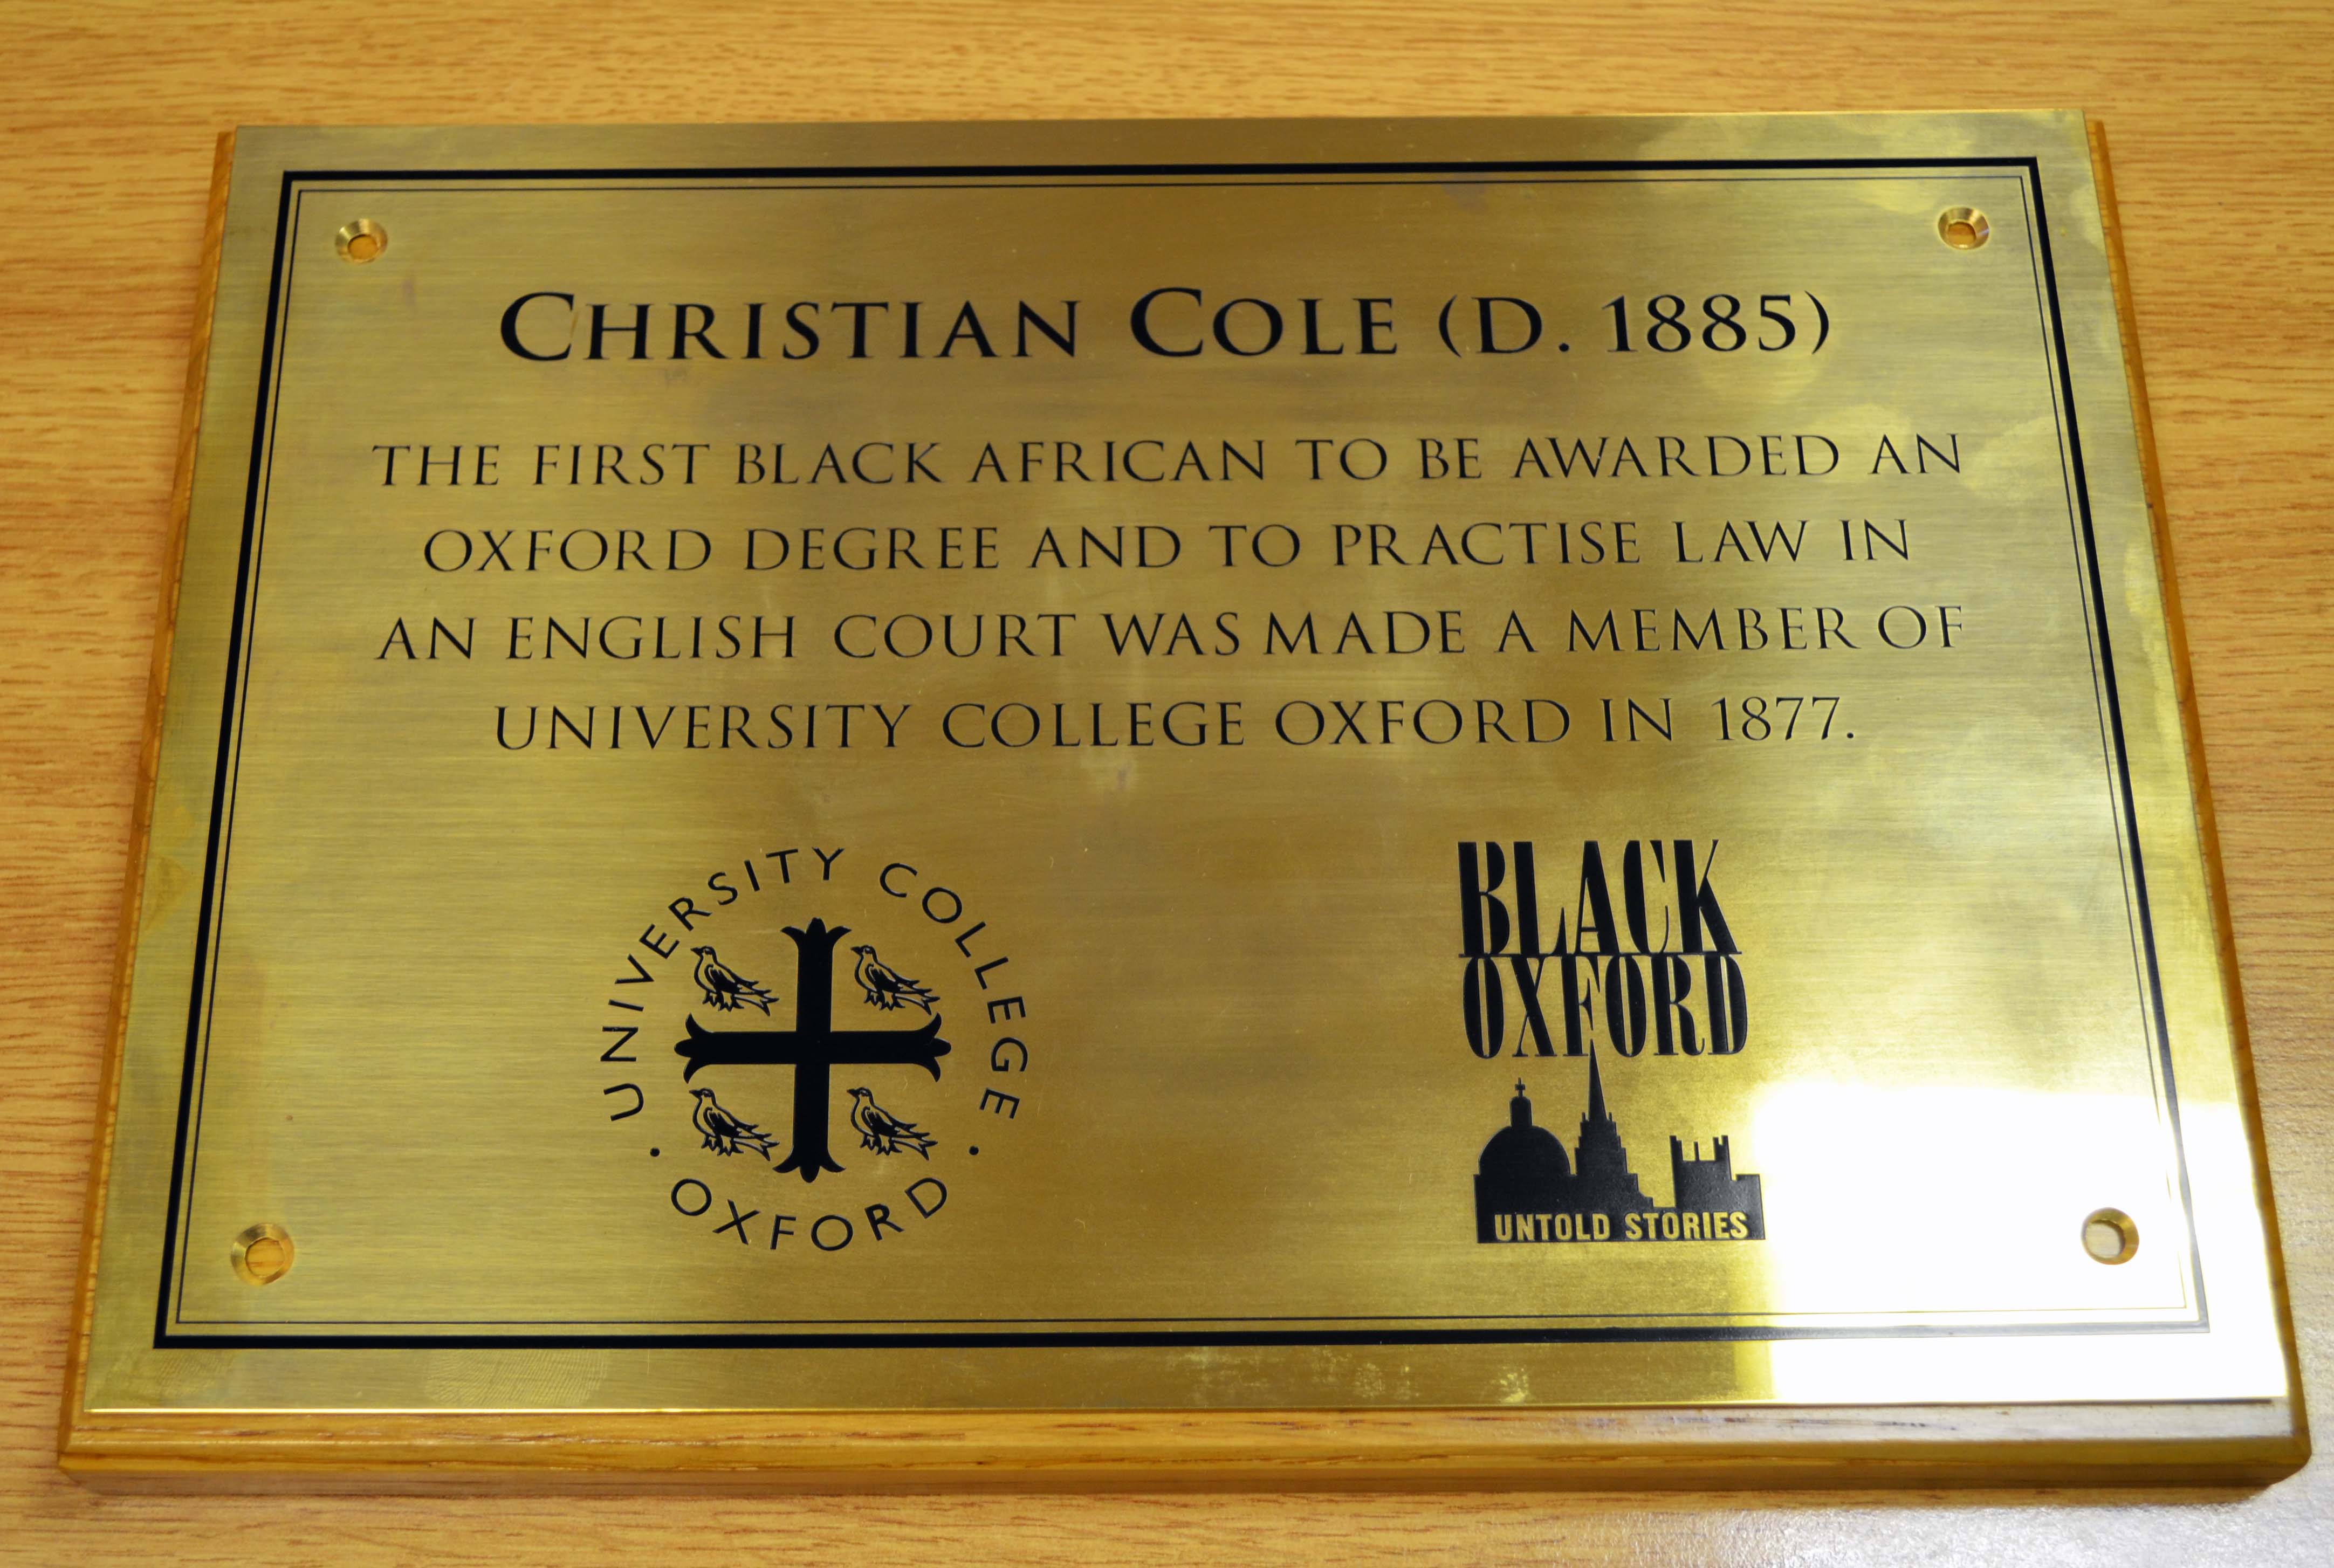 New plaque celebrates Oxford's first black student in 1870s